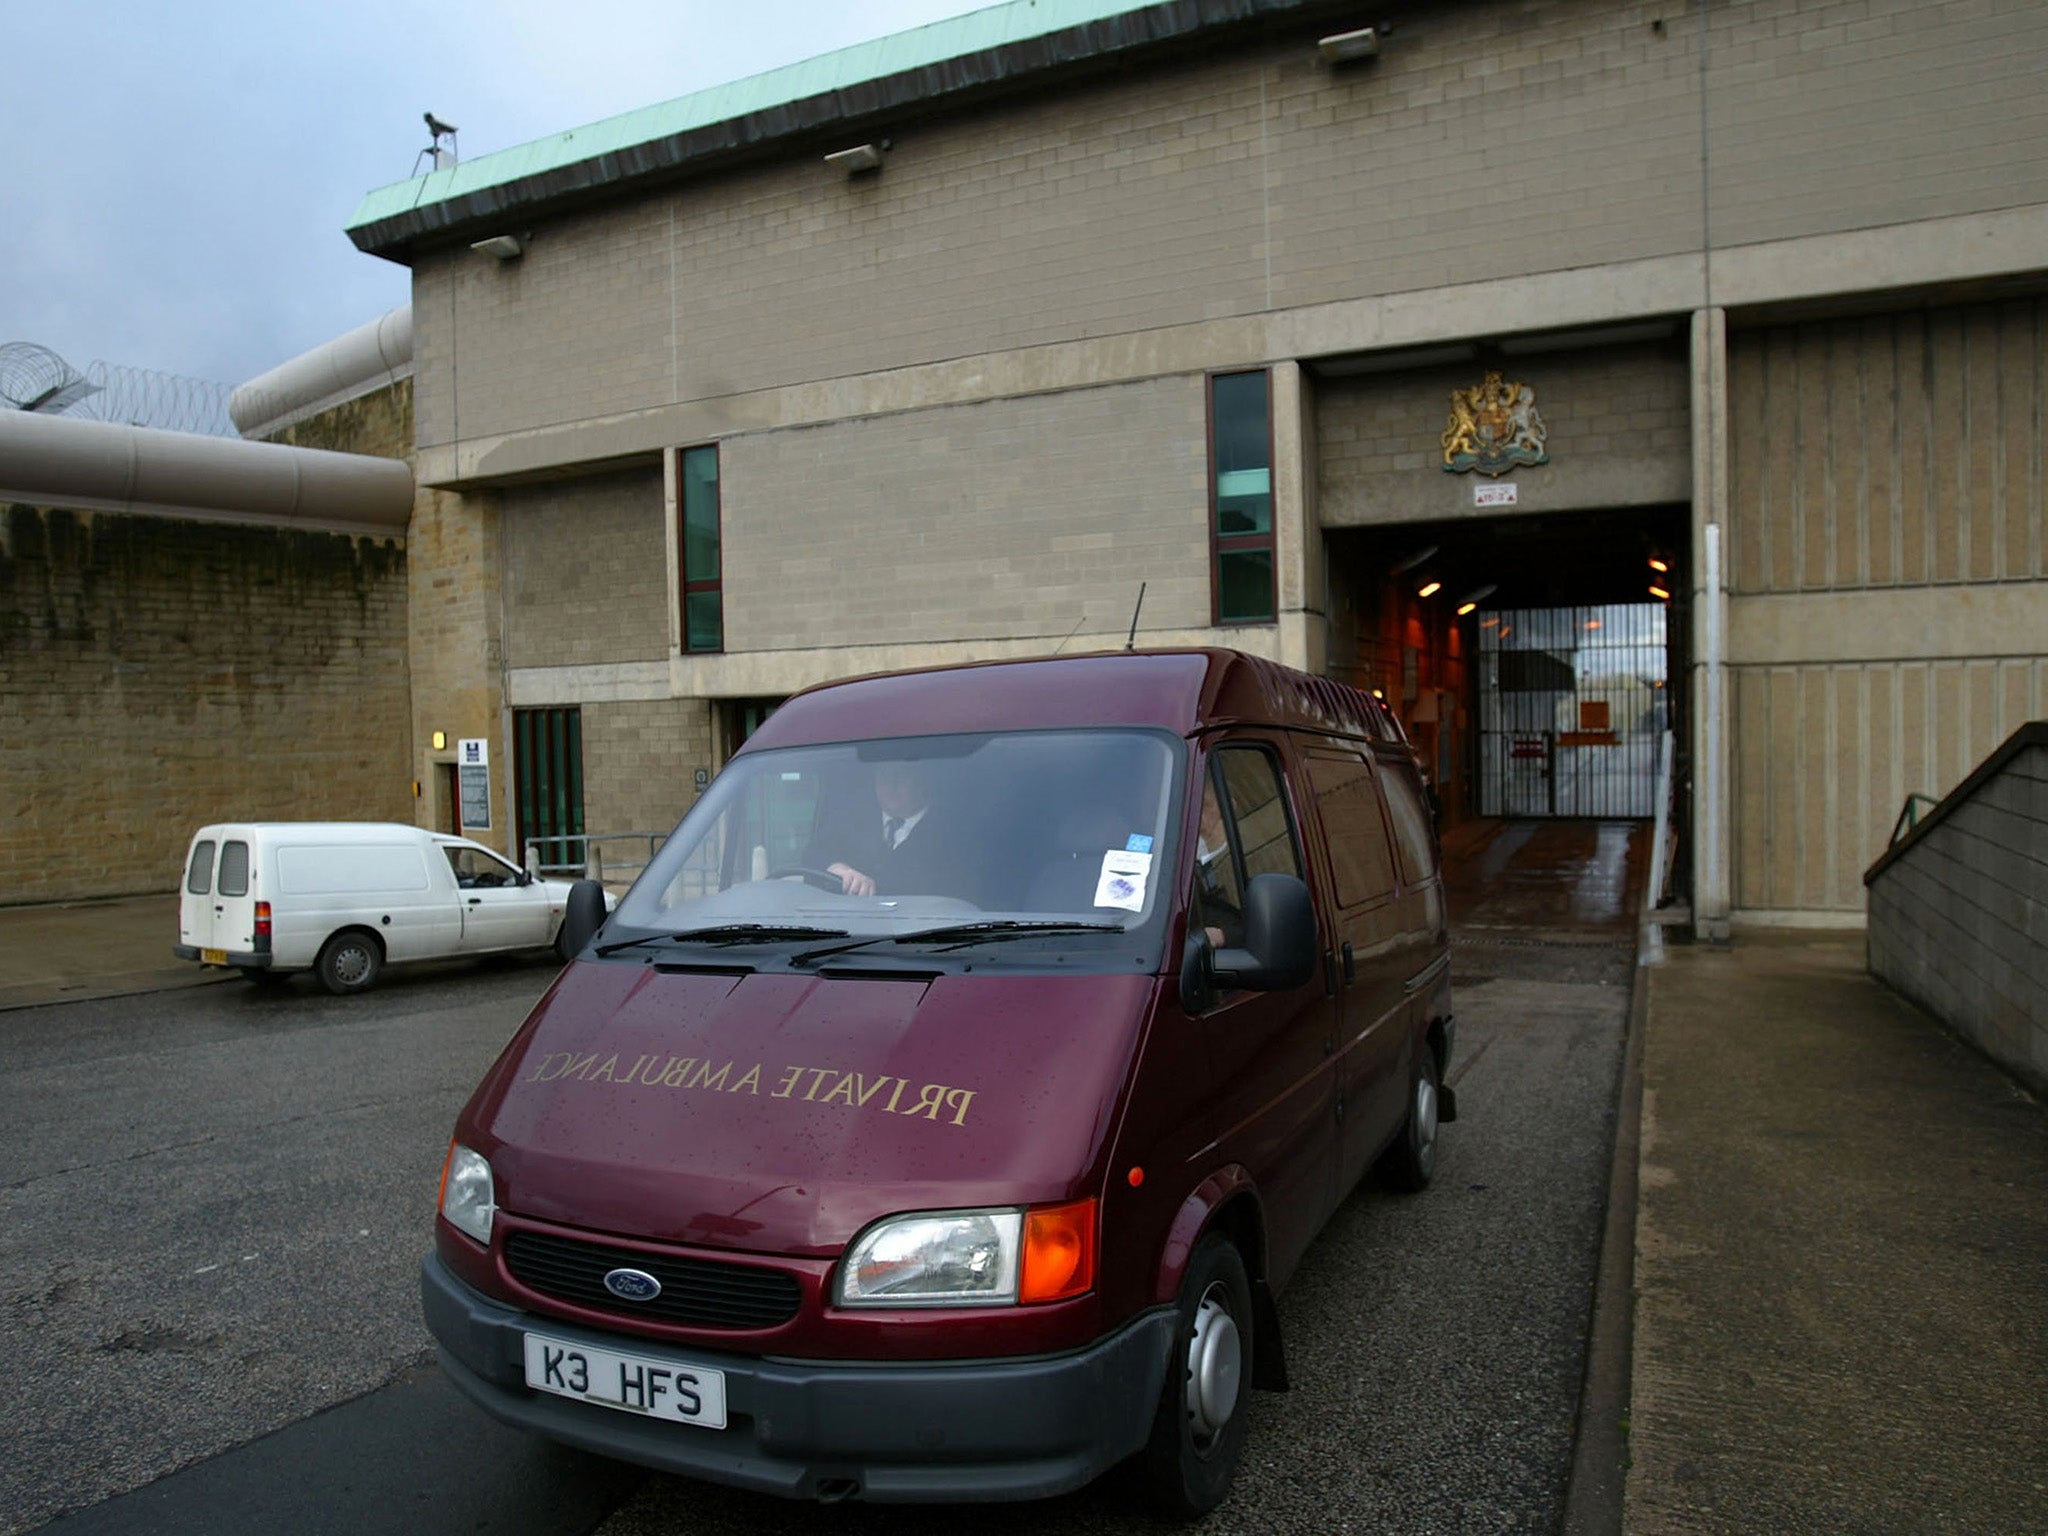 A funeral director leaving Wakefield prison where Shipman was found dead in 2004